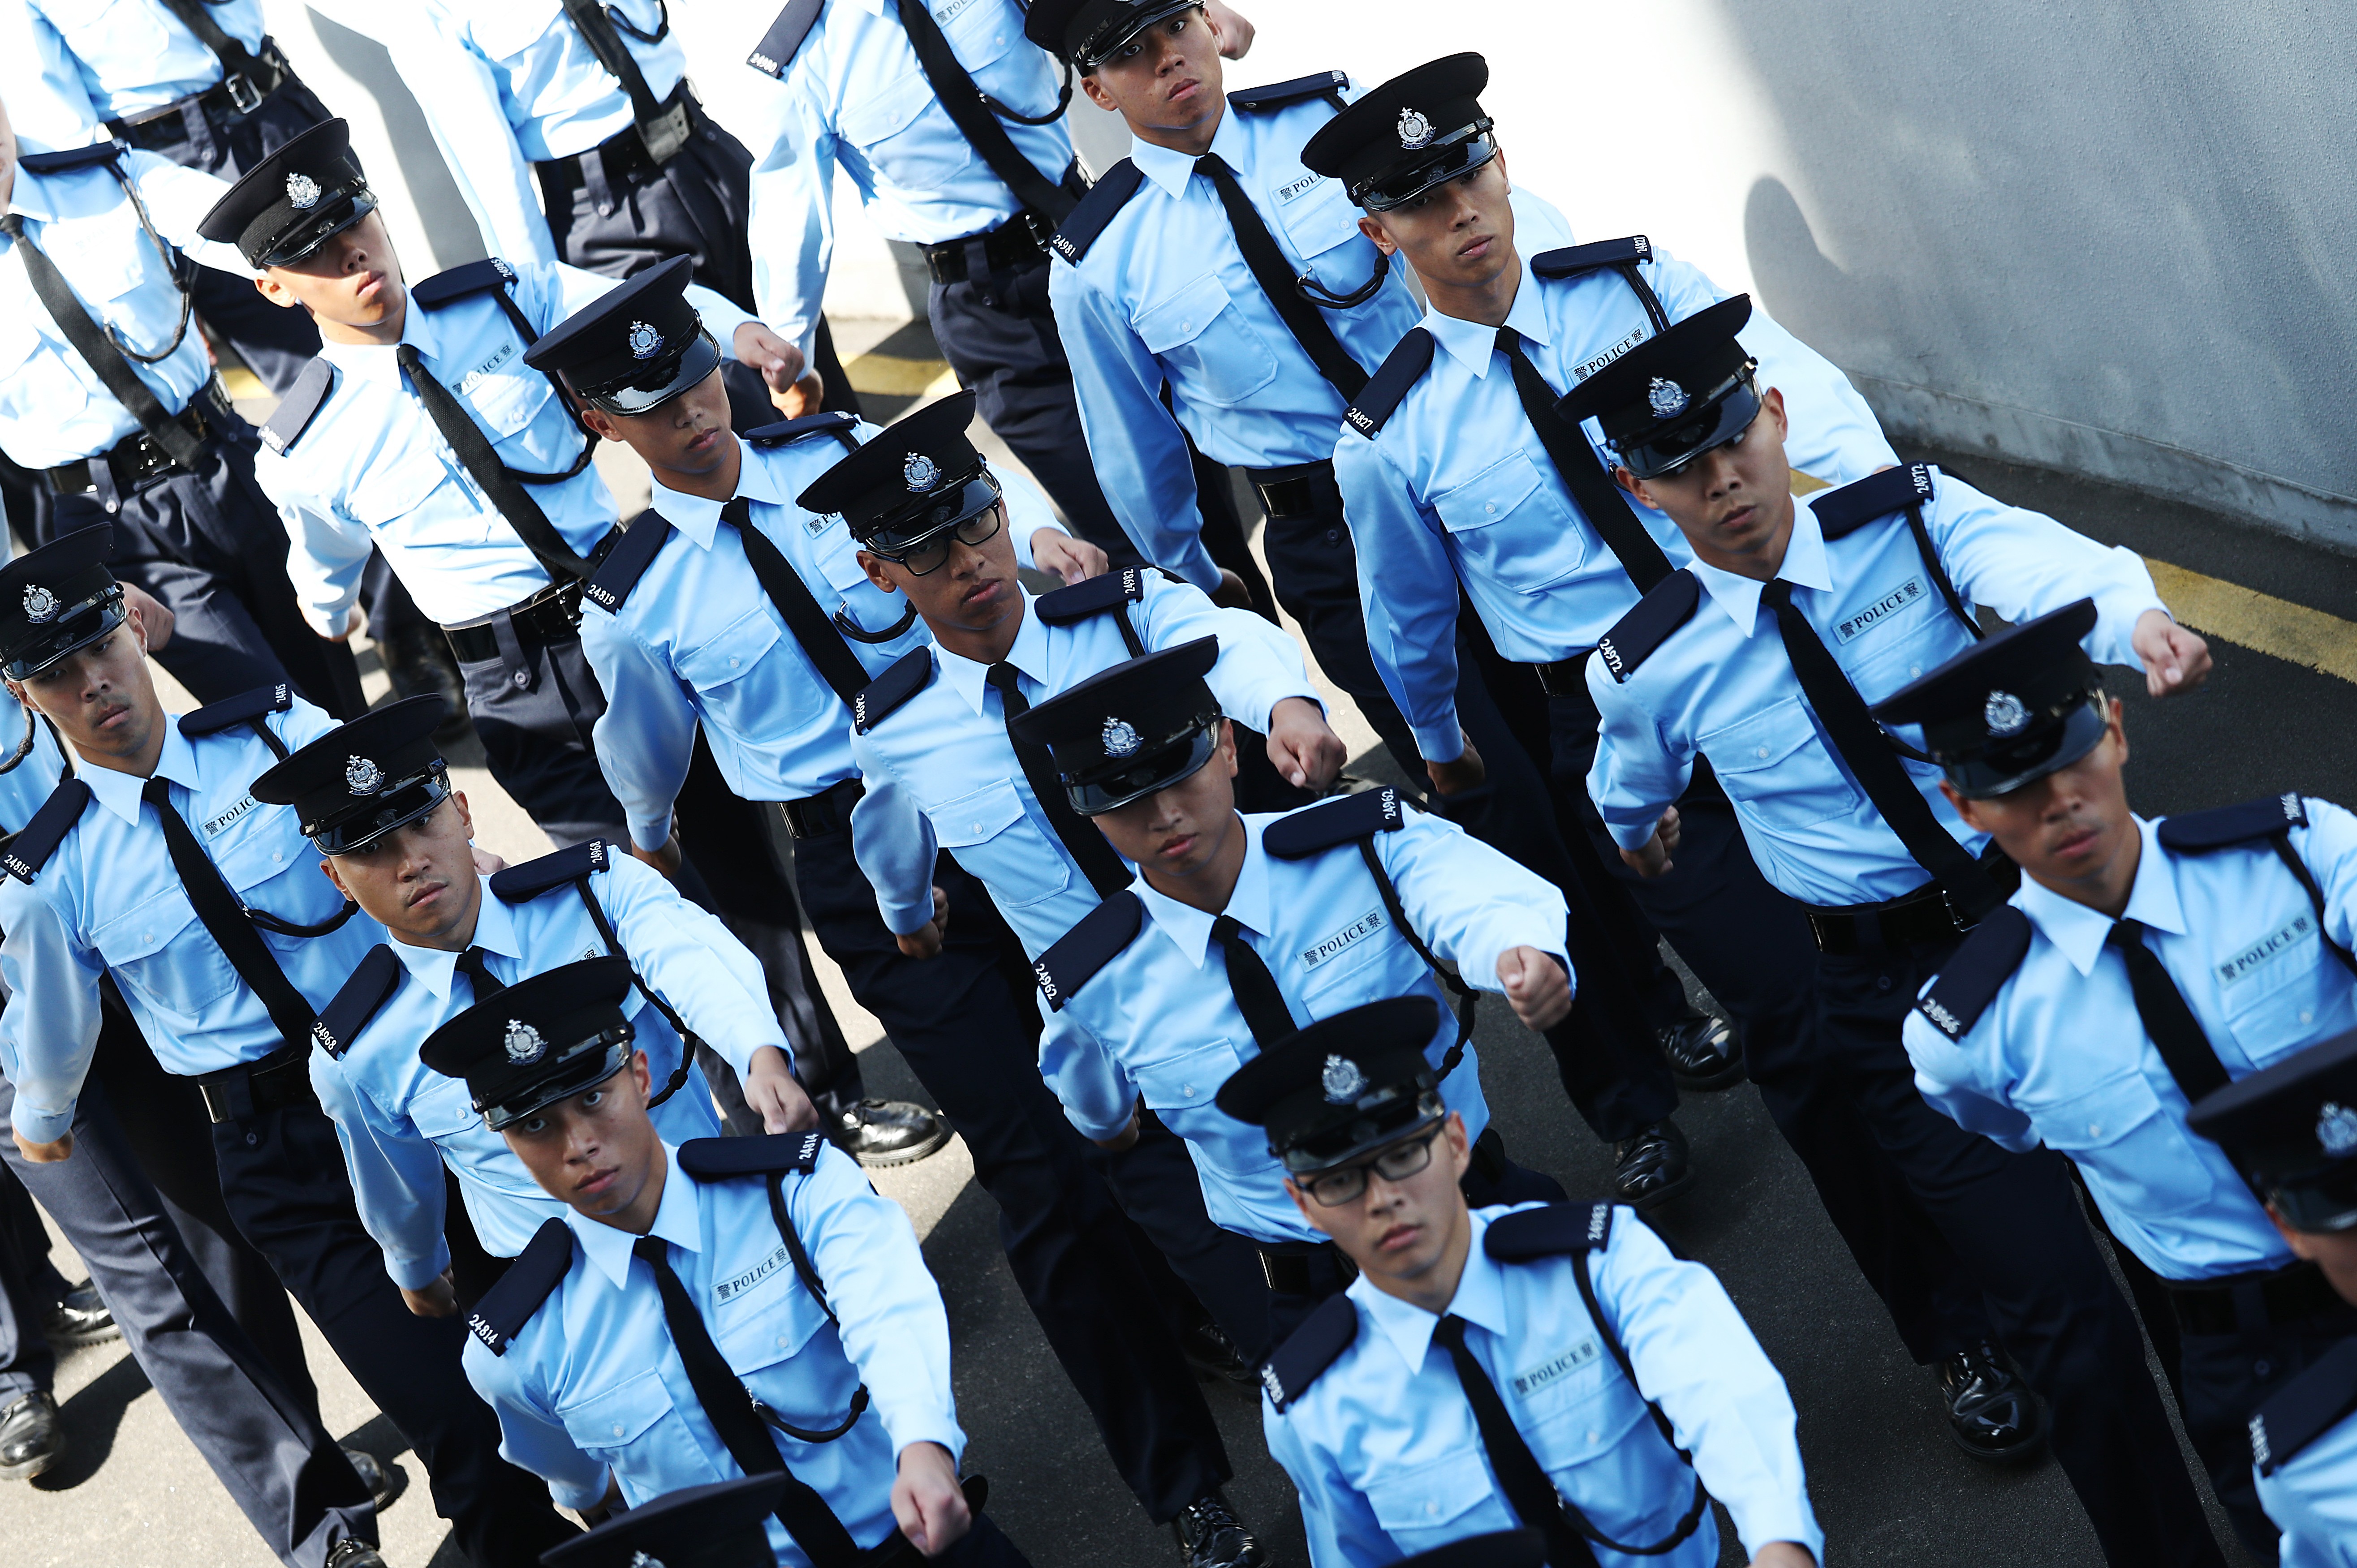 The police force accounts for the biggest proportion of the civil service, at 19.8 per cent. Photo: Nora Tam